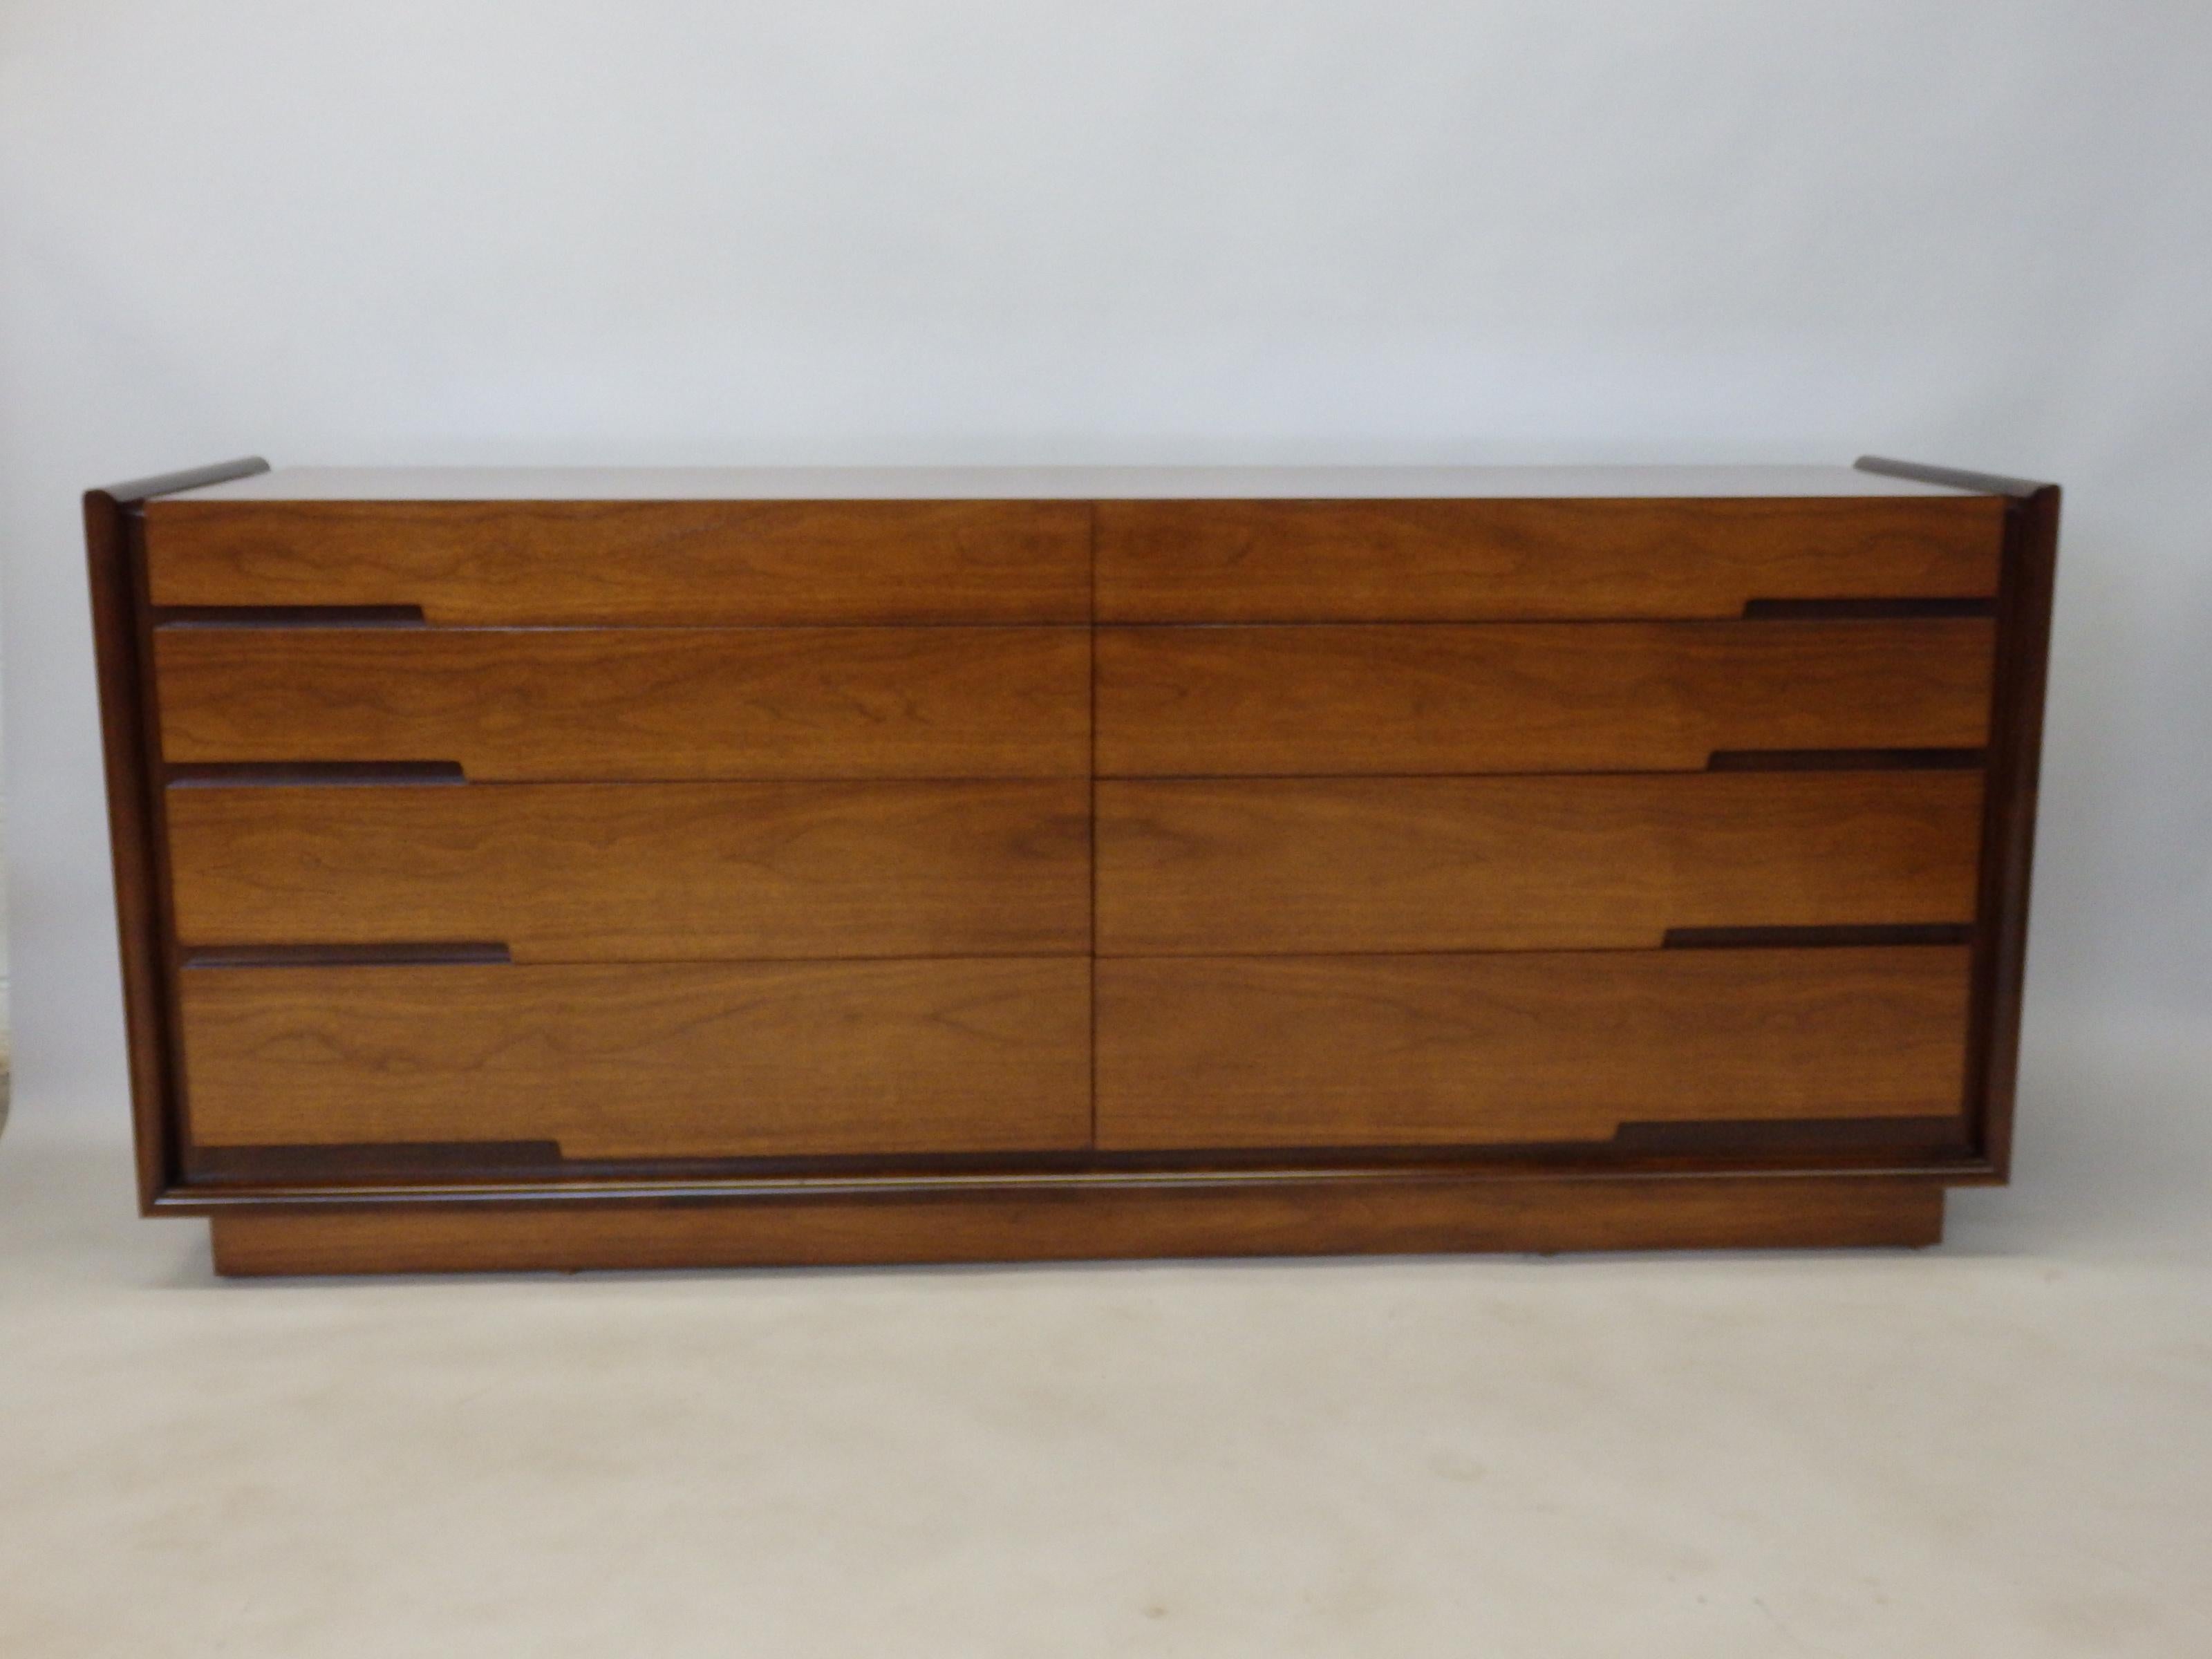 Lacquered Edmund Spence Long Low Swedish Double Dresser with graduated drawers